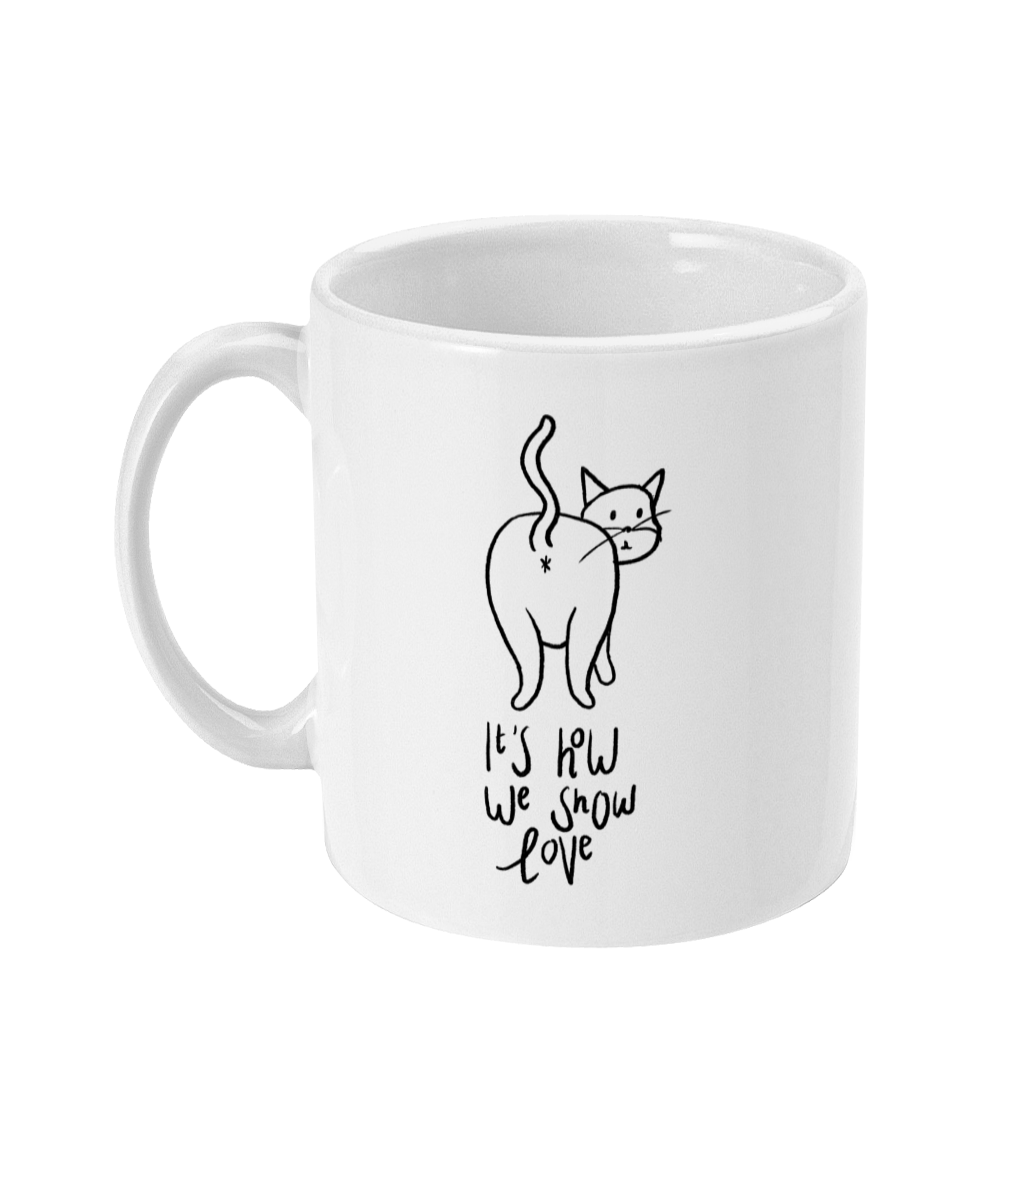 A 11oz glossy white mug with a cartoon drawn cat showing it's butthole for everyone to see. Underneath the cartoon is the saying 'It's how we show love' in handwritten cursive black font.  The mug is placed against a white background.